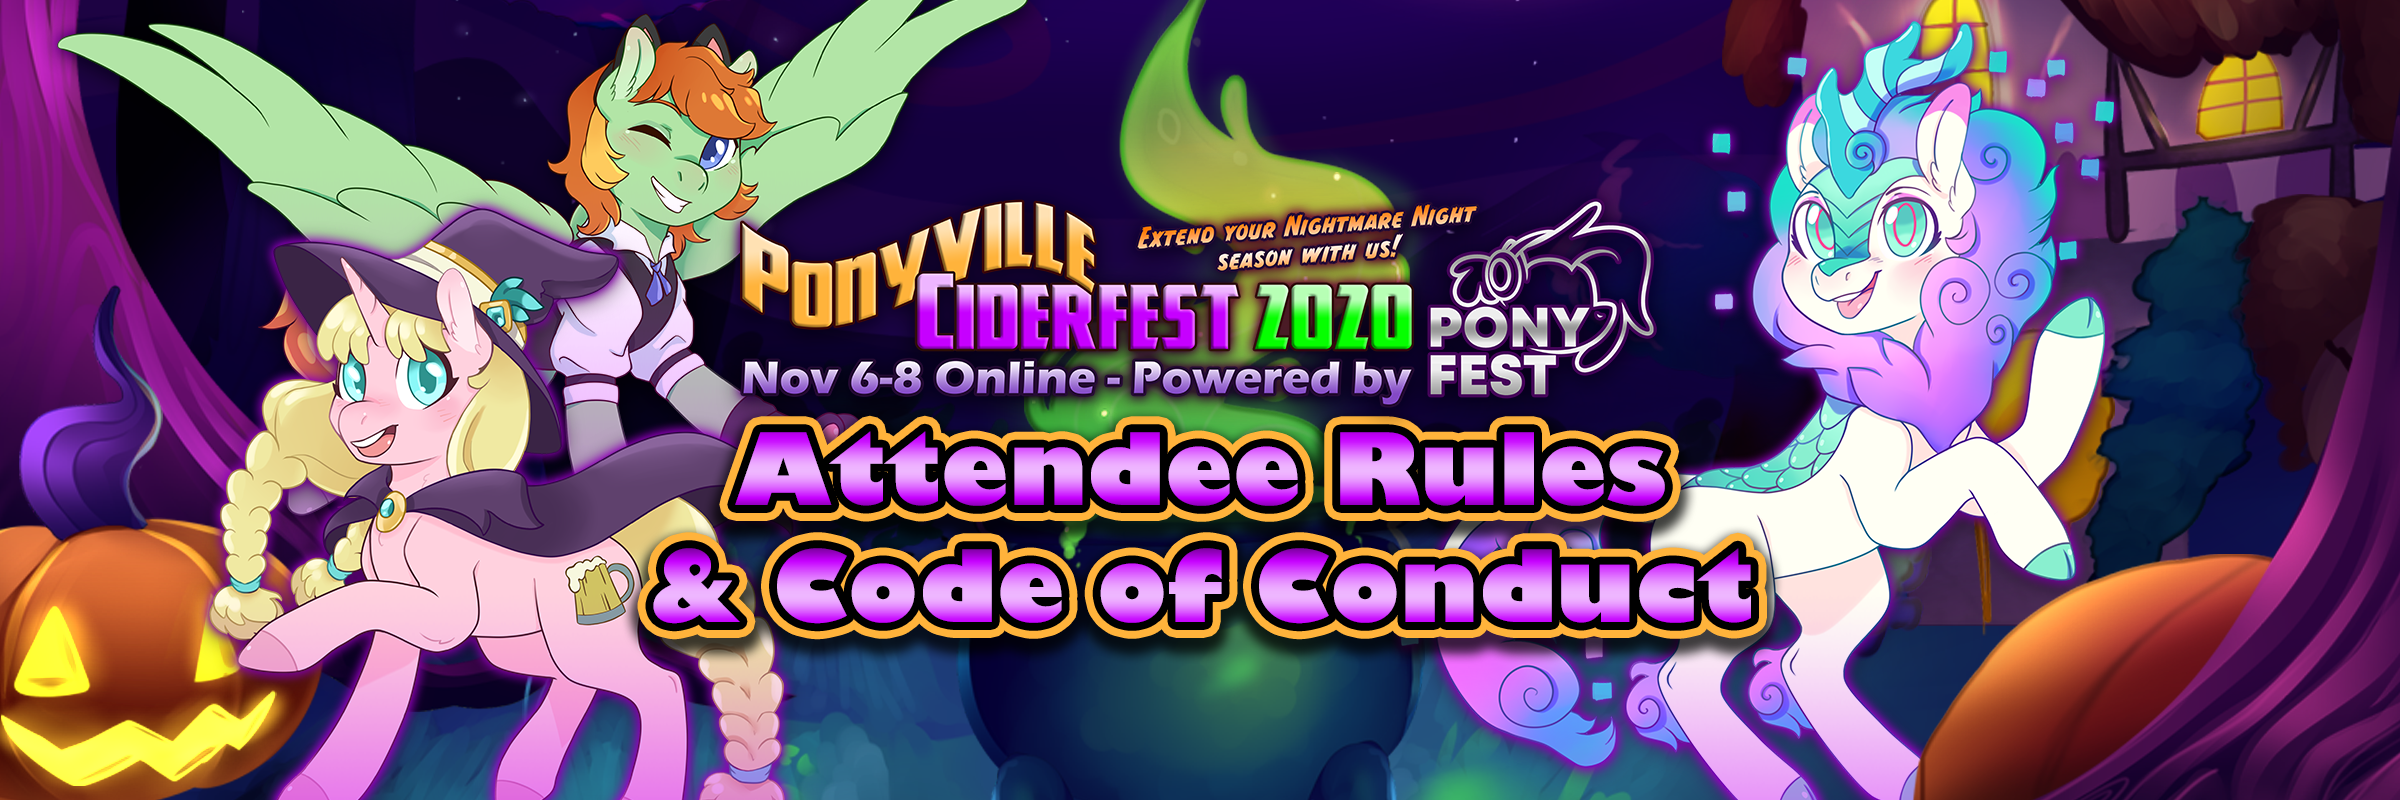 Attendee Rules & Code of Conduct